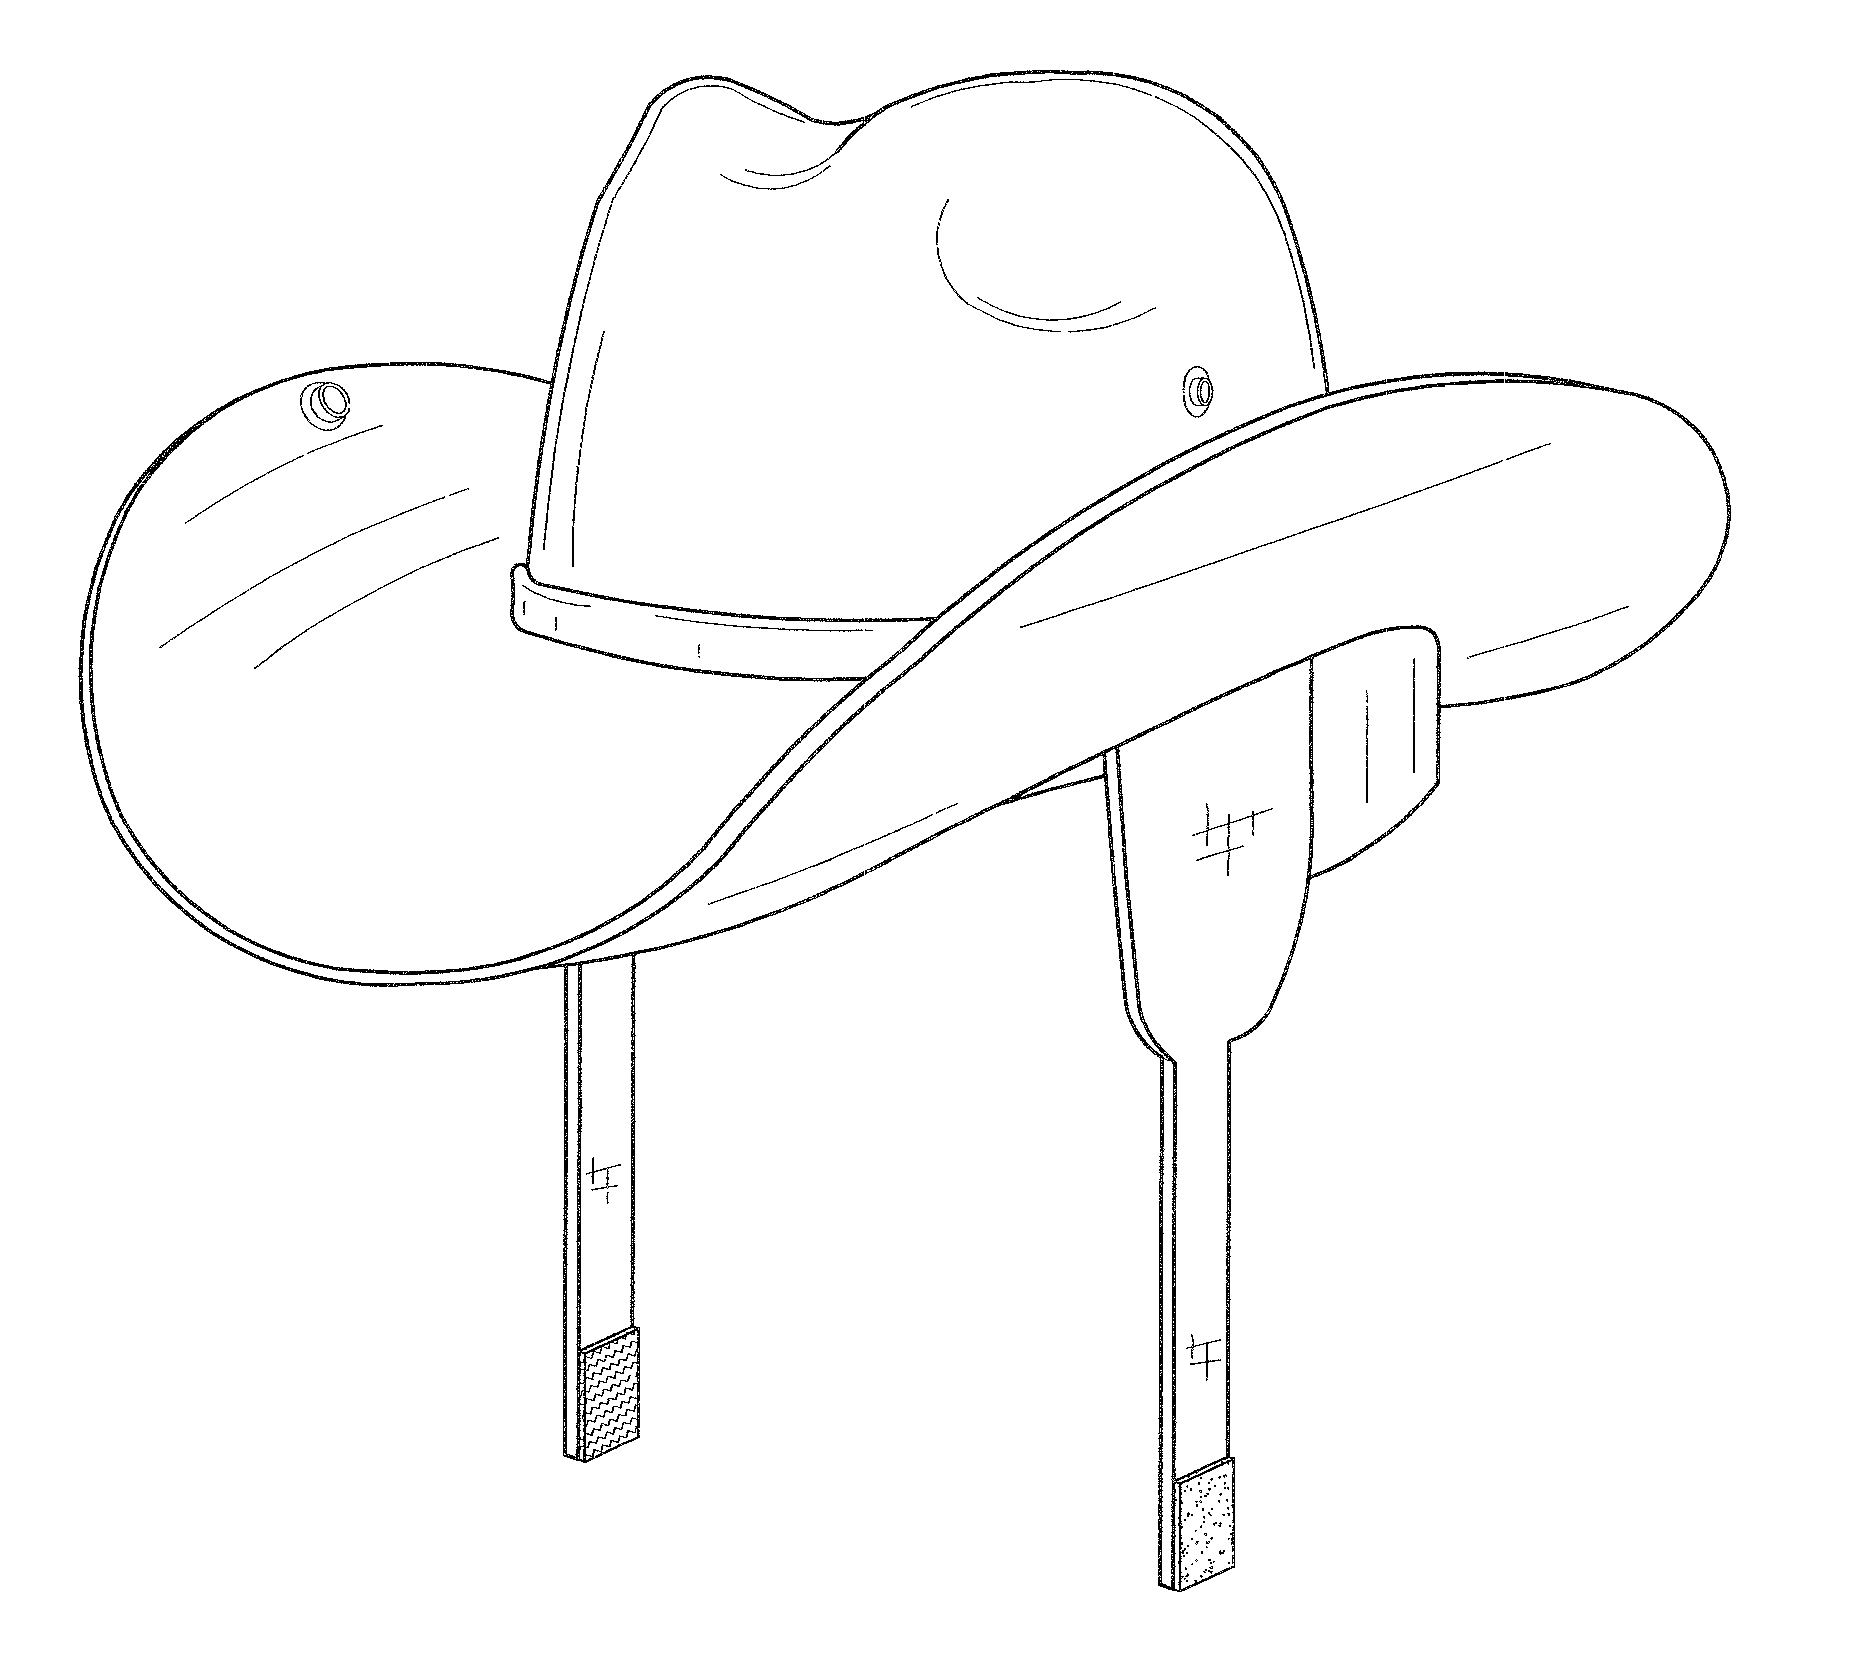 Patent USD637378 - Cowboy hat with ear flaps and chin strap ...